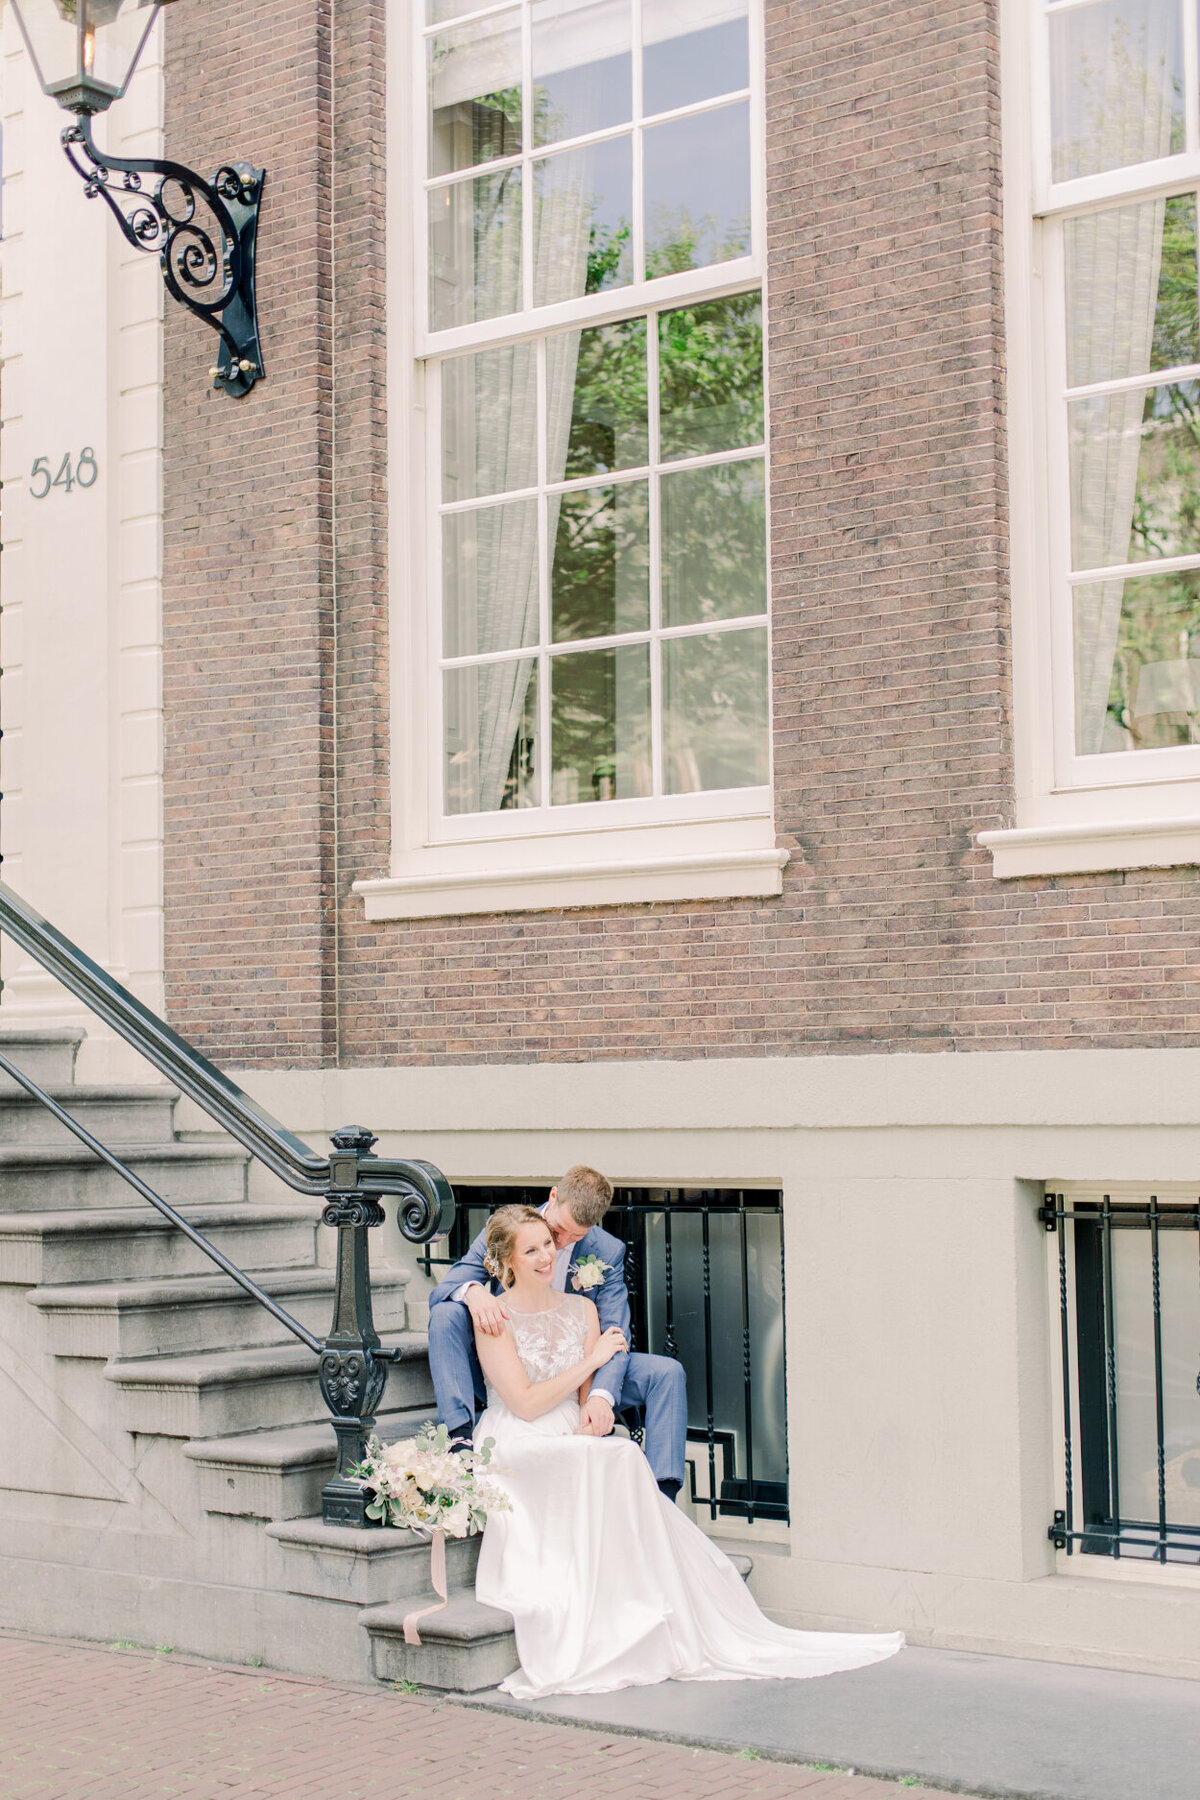 Wedding portrait of the bride and groom in the streets of Amsterdam for their city elopement for a photoshoot organized by Lovely & Planned